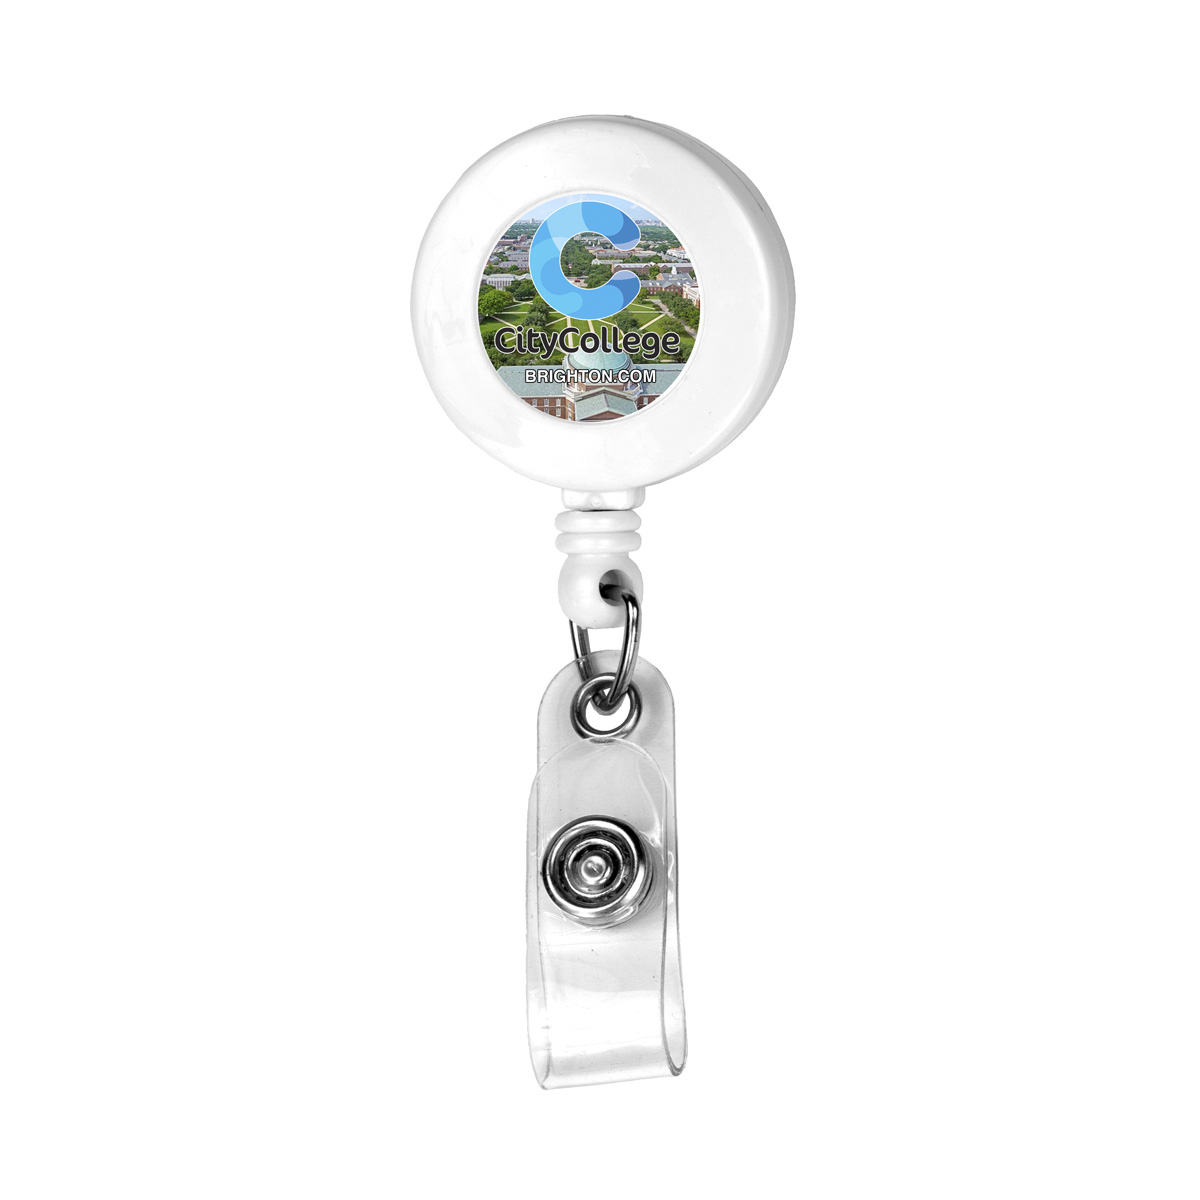 BELLEFONTAINE VL 30 Cord Round Retractable Badge Reel and Badge Holder  with Rotating Alligator Clip Attachment - Innovation Line